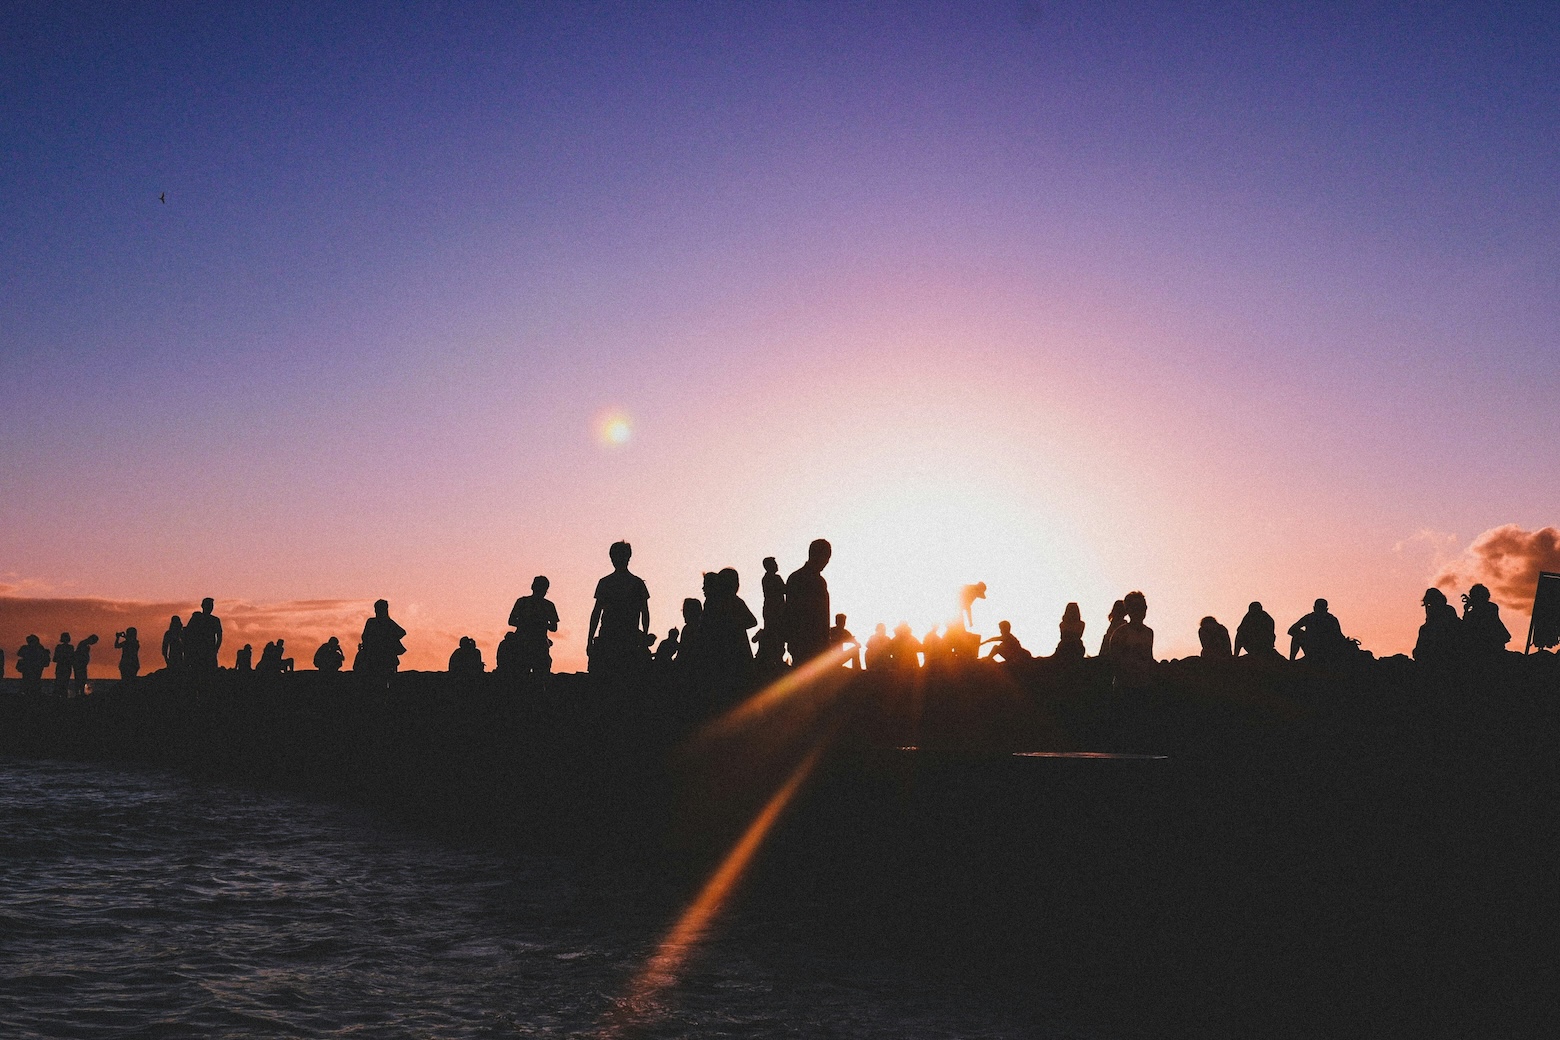 image of silouhette of a group of people standing watching sunset